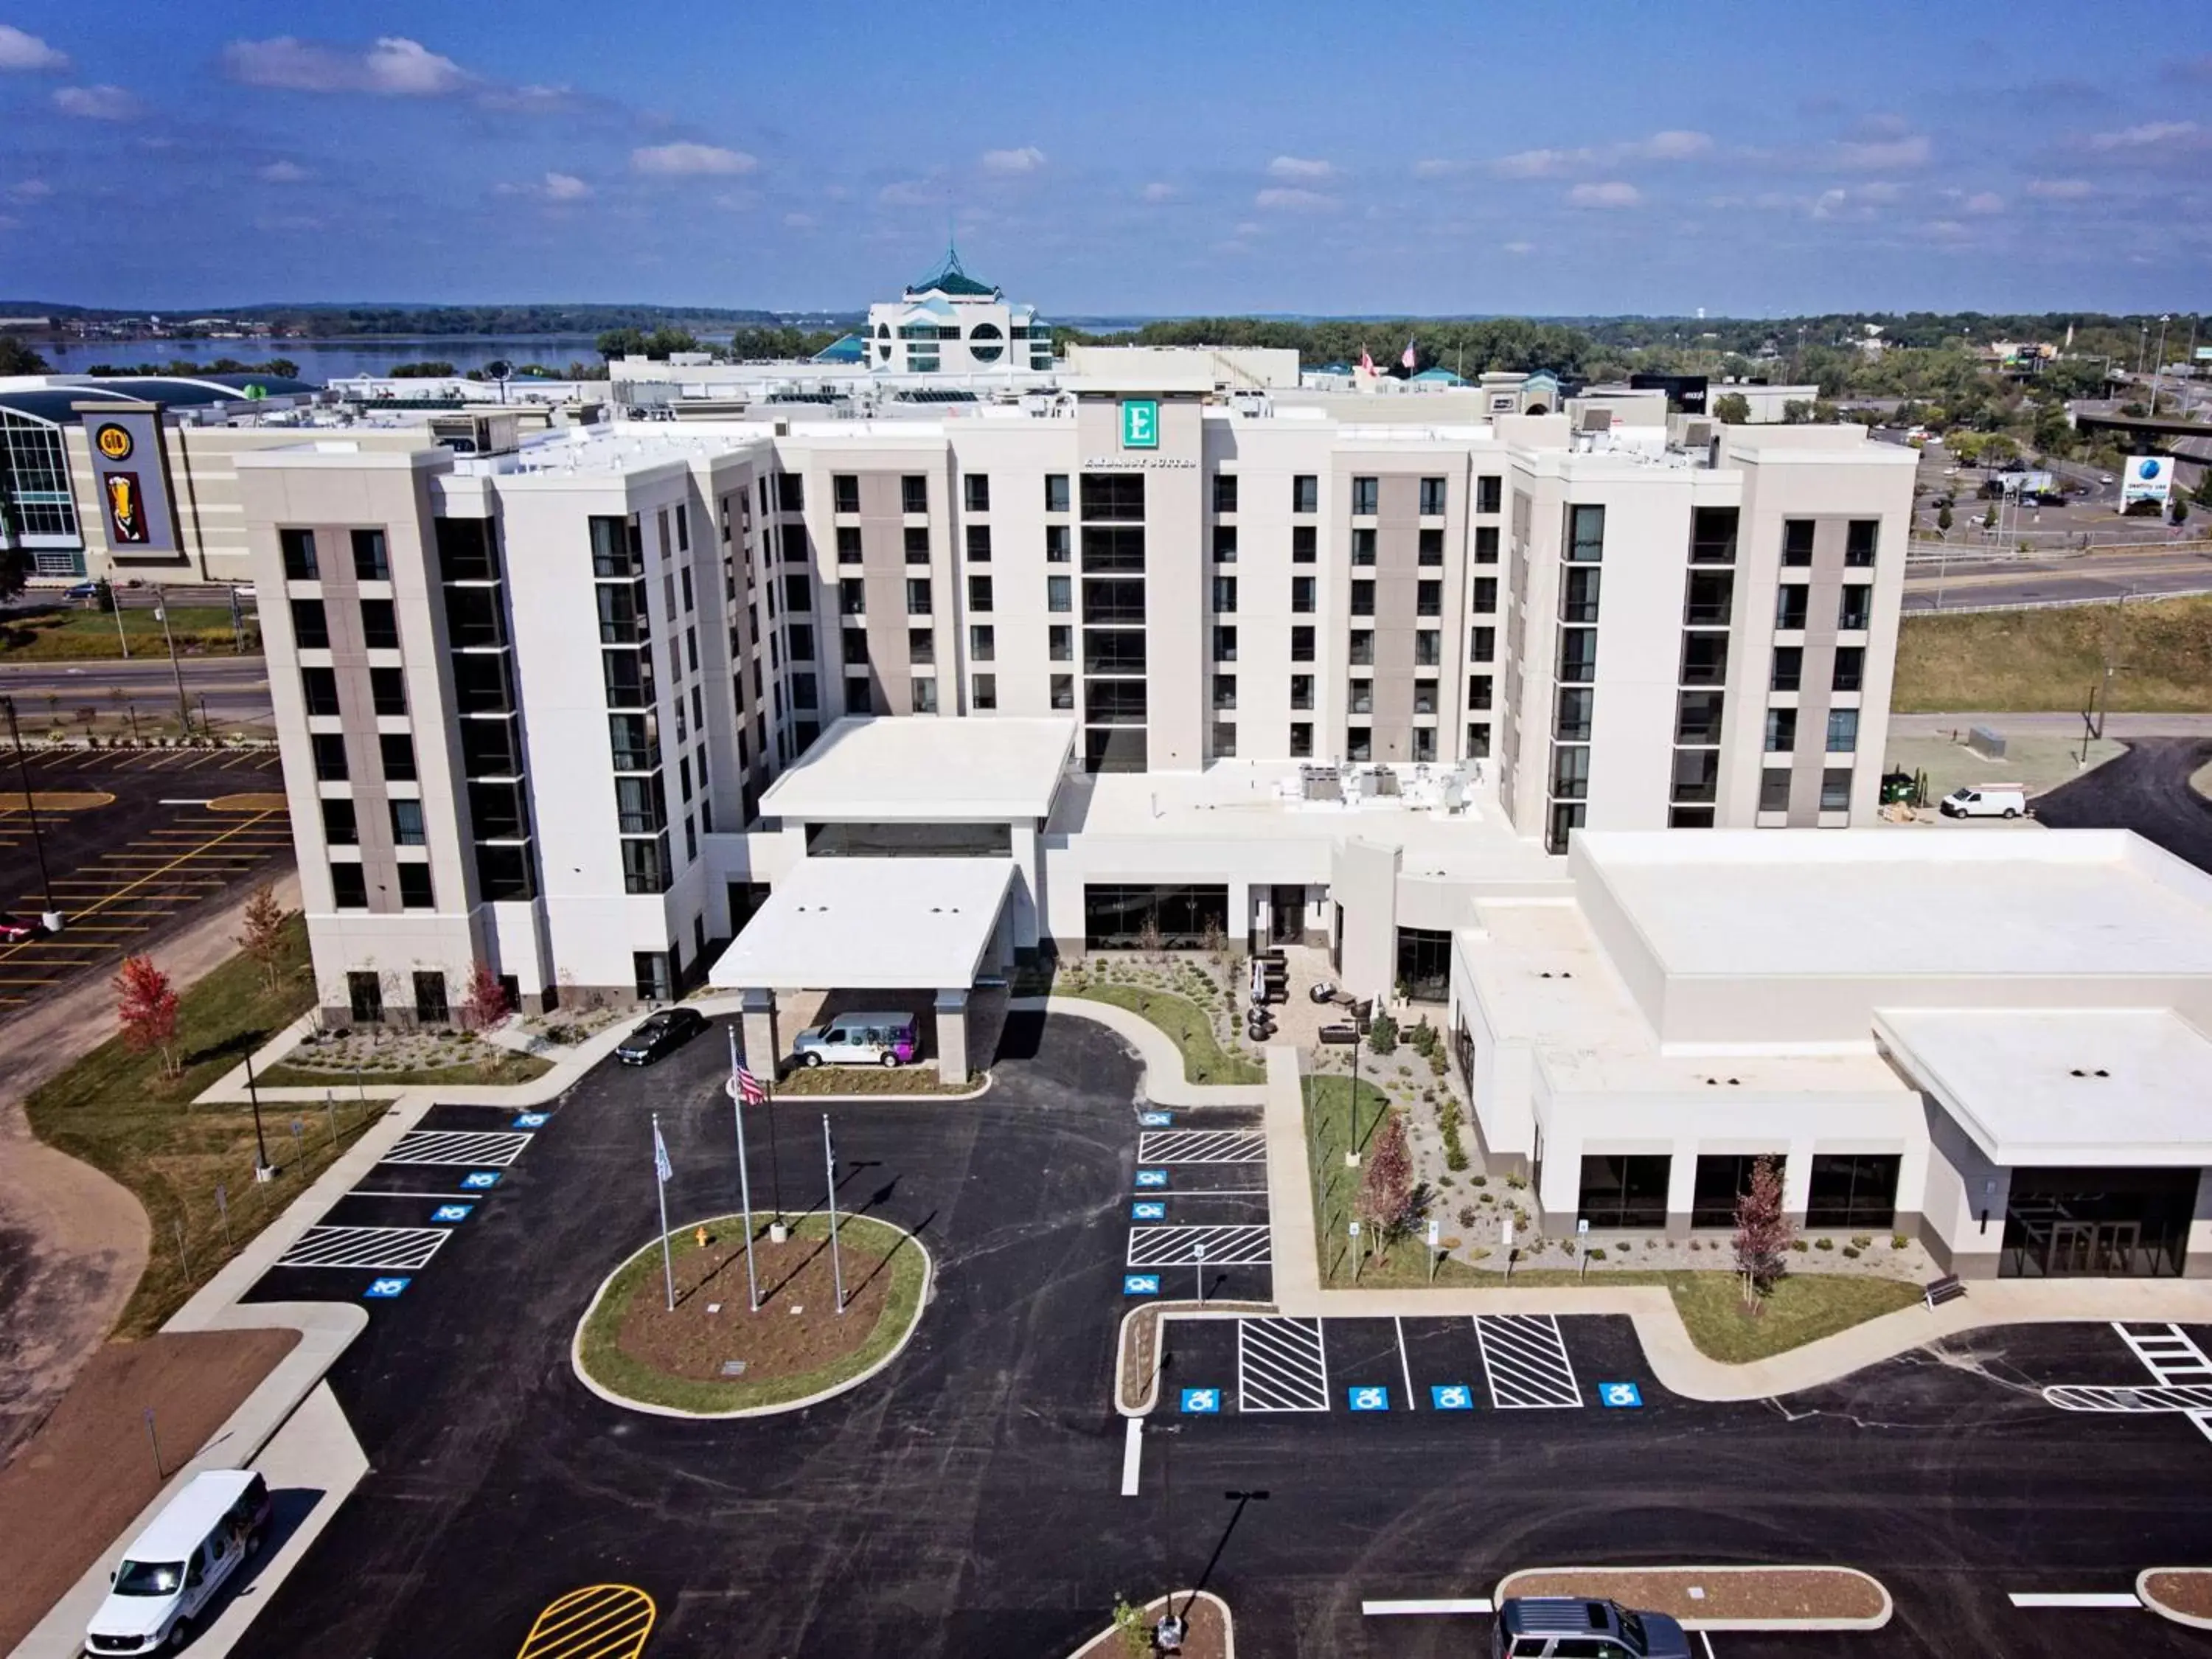 Property building, Bird's-eye View in Embassy Suites By Hilton Syracuse Destiny USA